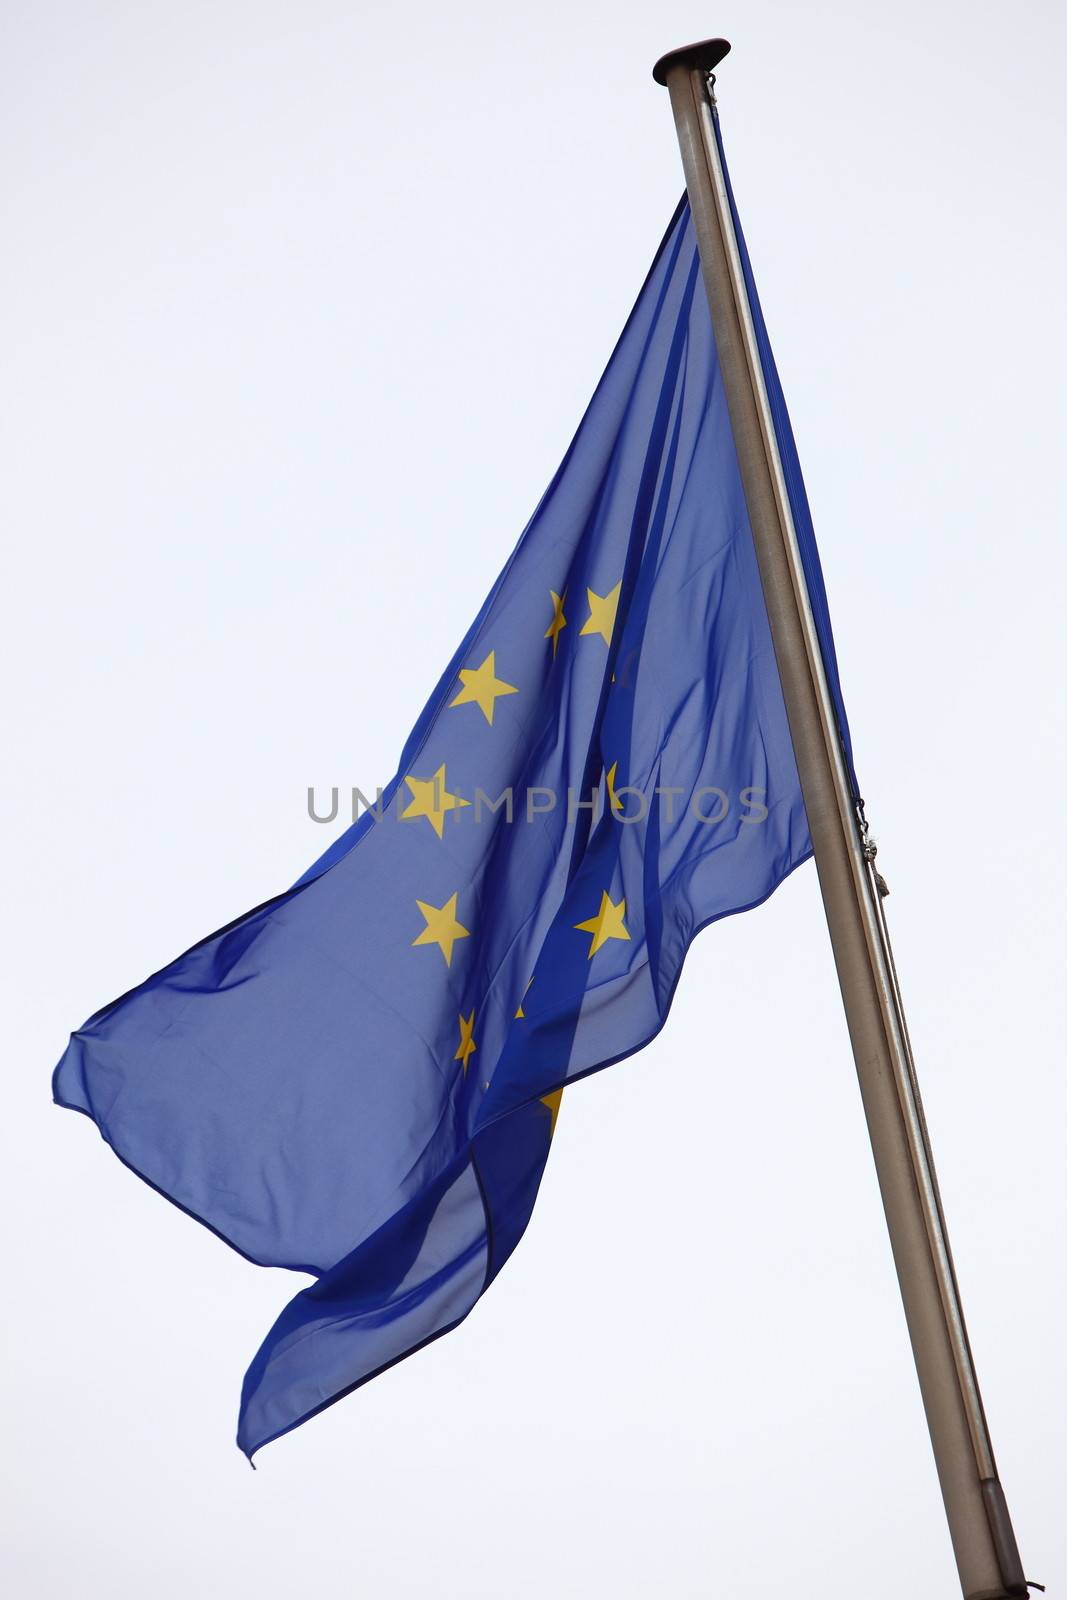 European Union flag flying on a flagpole against a light grey sky with copyspace